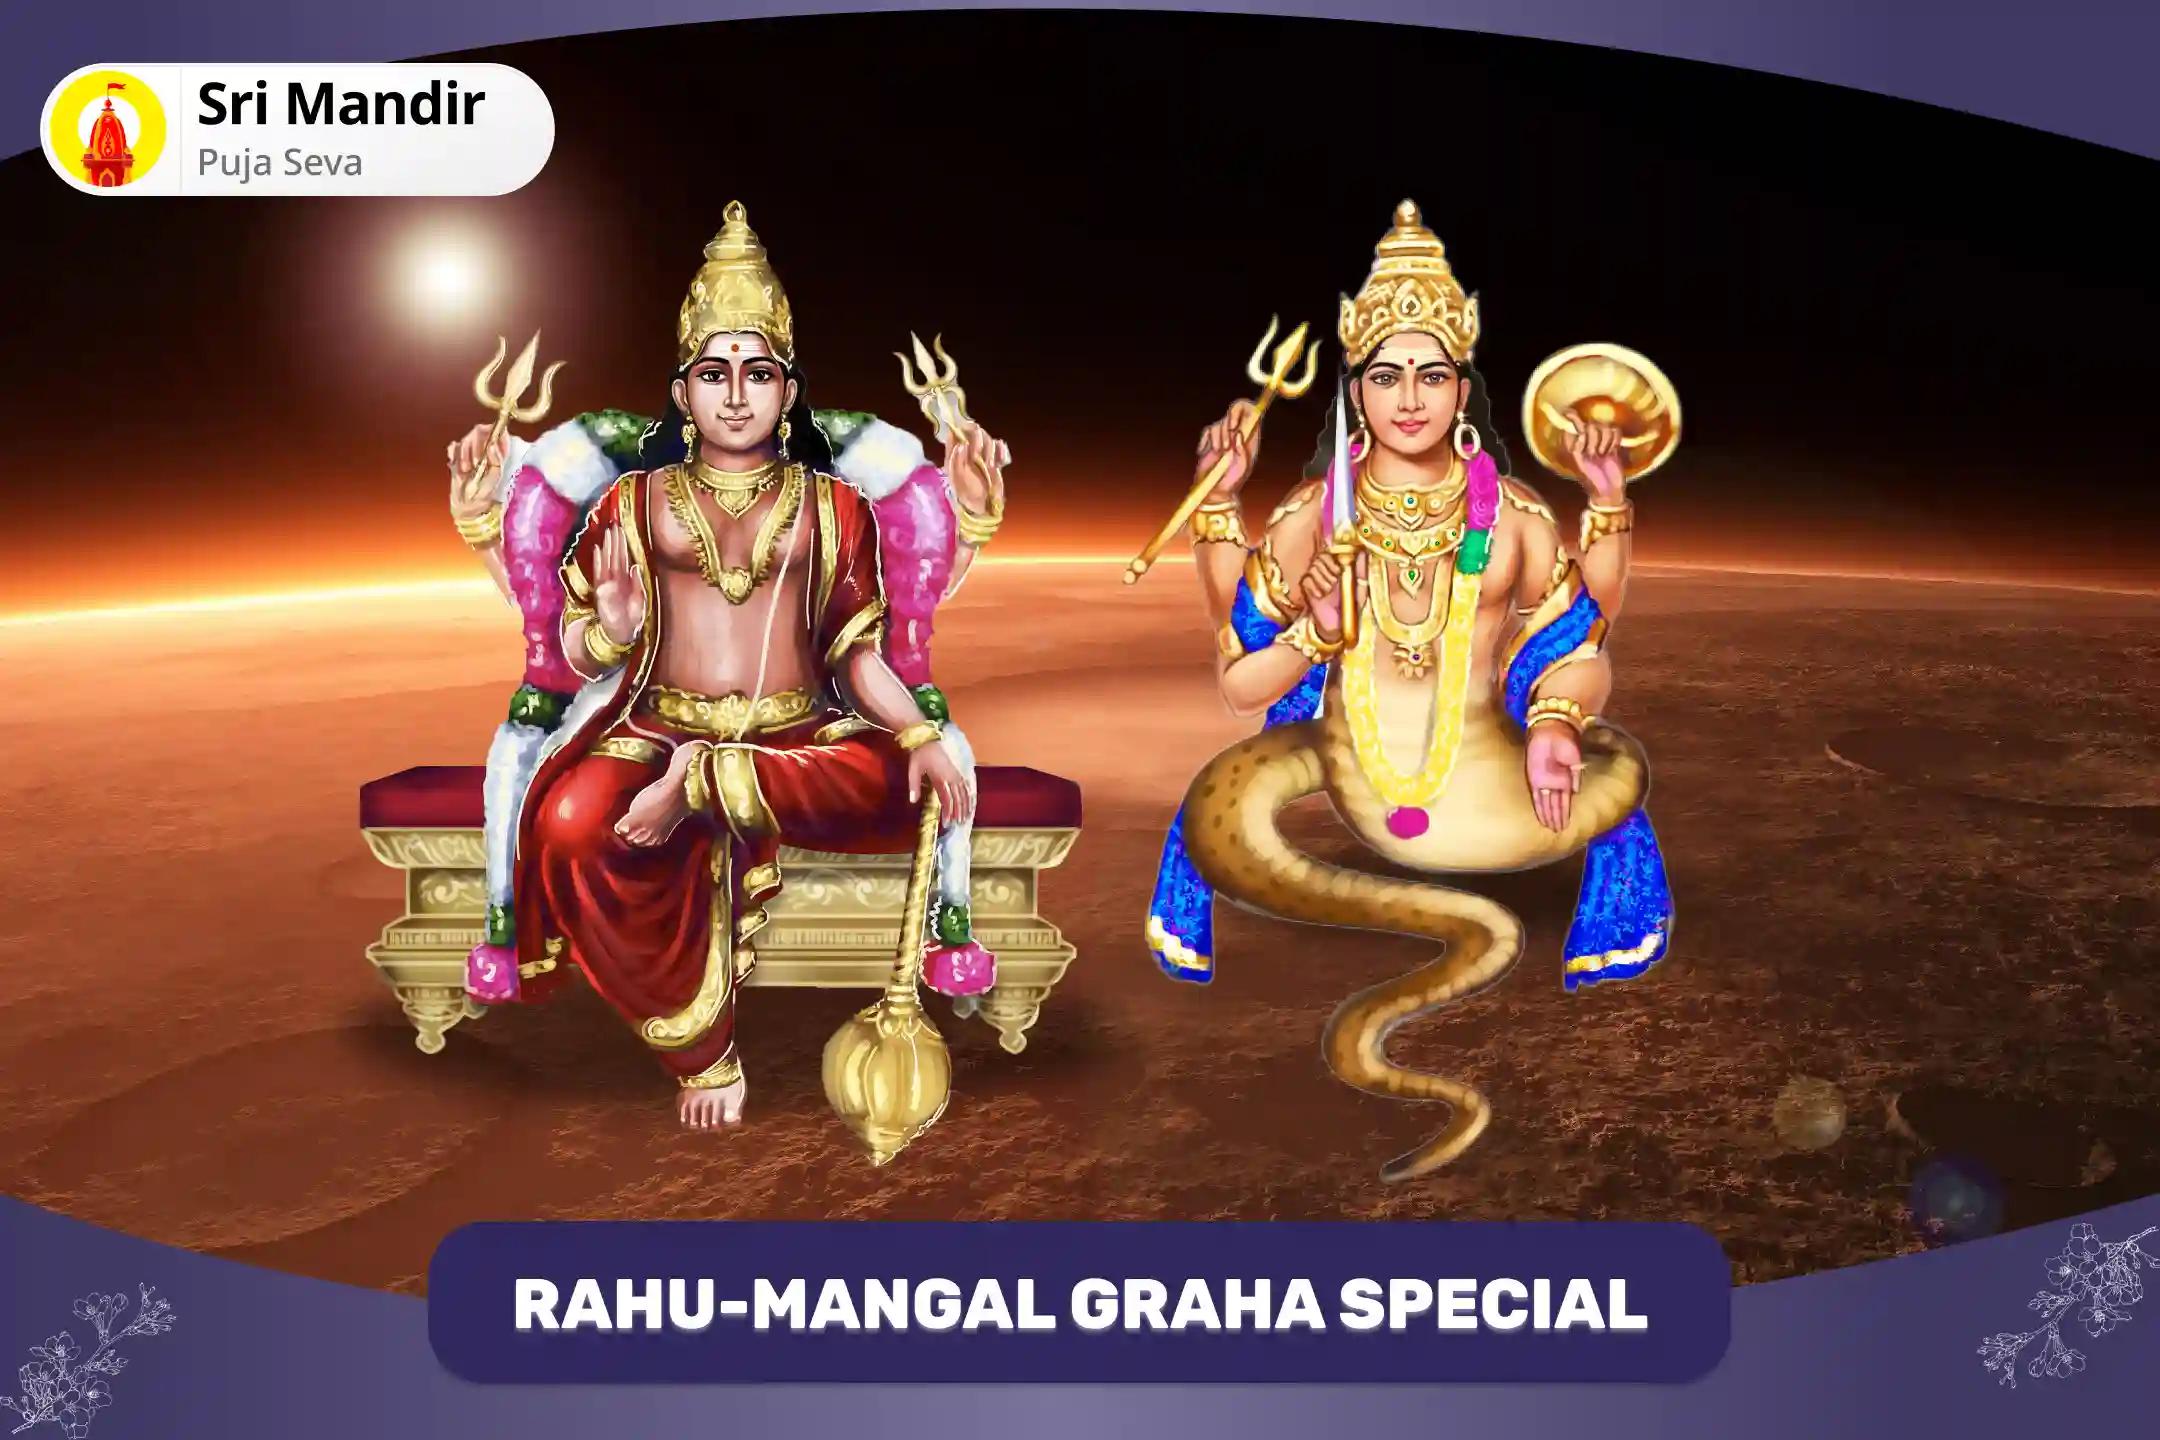 Rahu-Mangal Graha Special Angarak Dosha Shanti Puja and Yagya for Overcoming Aggression and Conflicts in Personal and Professional Relationships